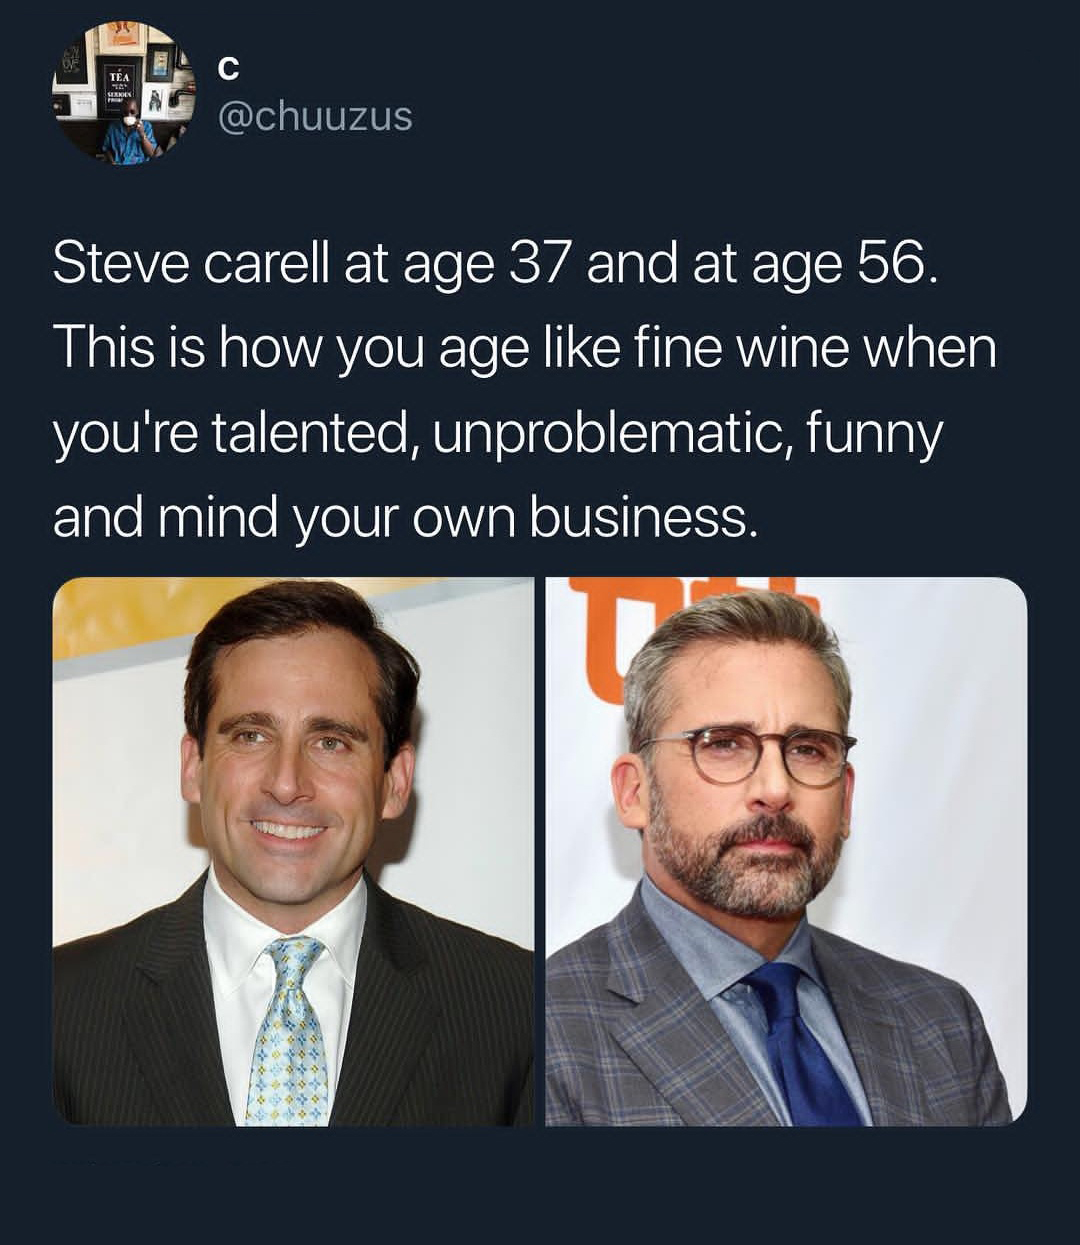 steve carell aging - Steve carell at age 37 and at age 56. This is how you age fine wine when you're talented, unproblematic, funny and mind your own business.